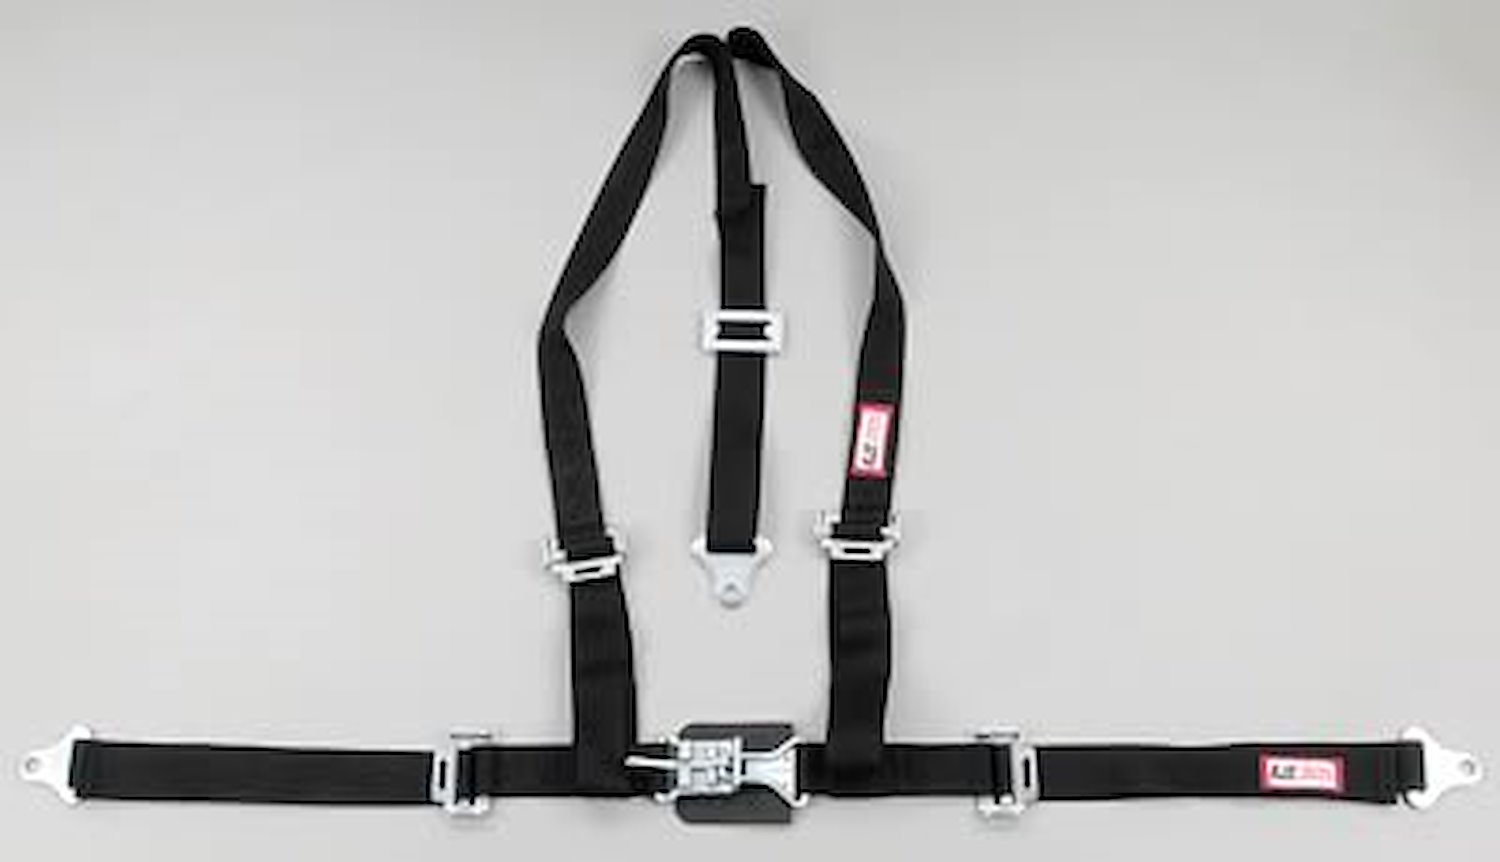 NON-SFI L&L HARNESS 2 PULL UP Lap Belt BOLT SEWN IN 2 S.H. INDIVIDUAL FLOOR Mount w/STERNUM STRAP WRAP/BOLT RED